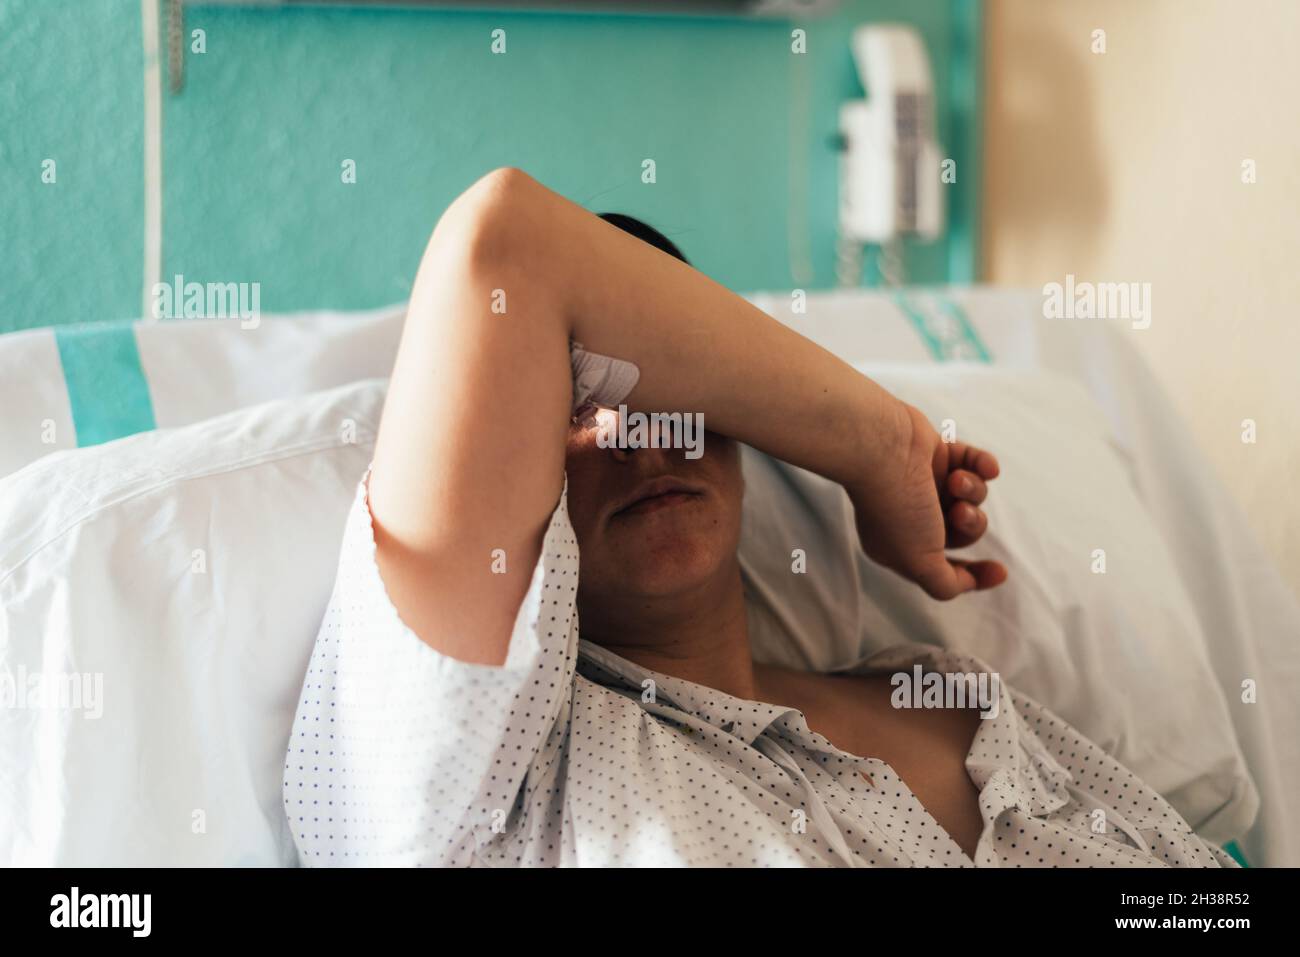 Young woman hospitalized in a bed. Gesture of pain and concern. Stock Photo